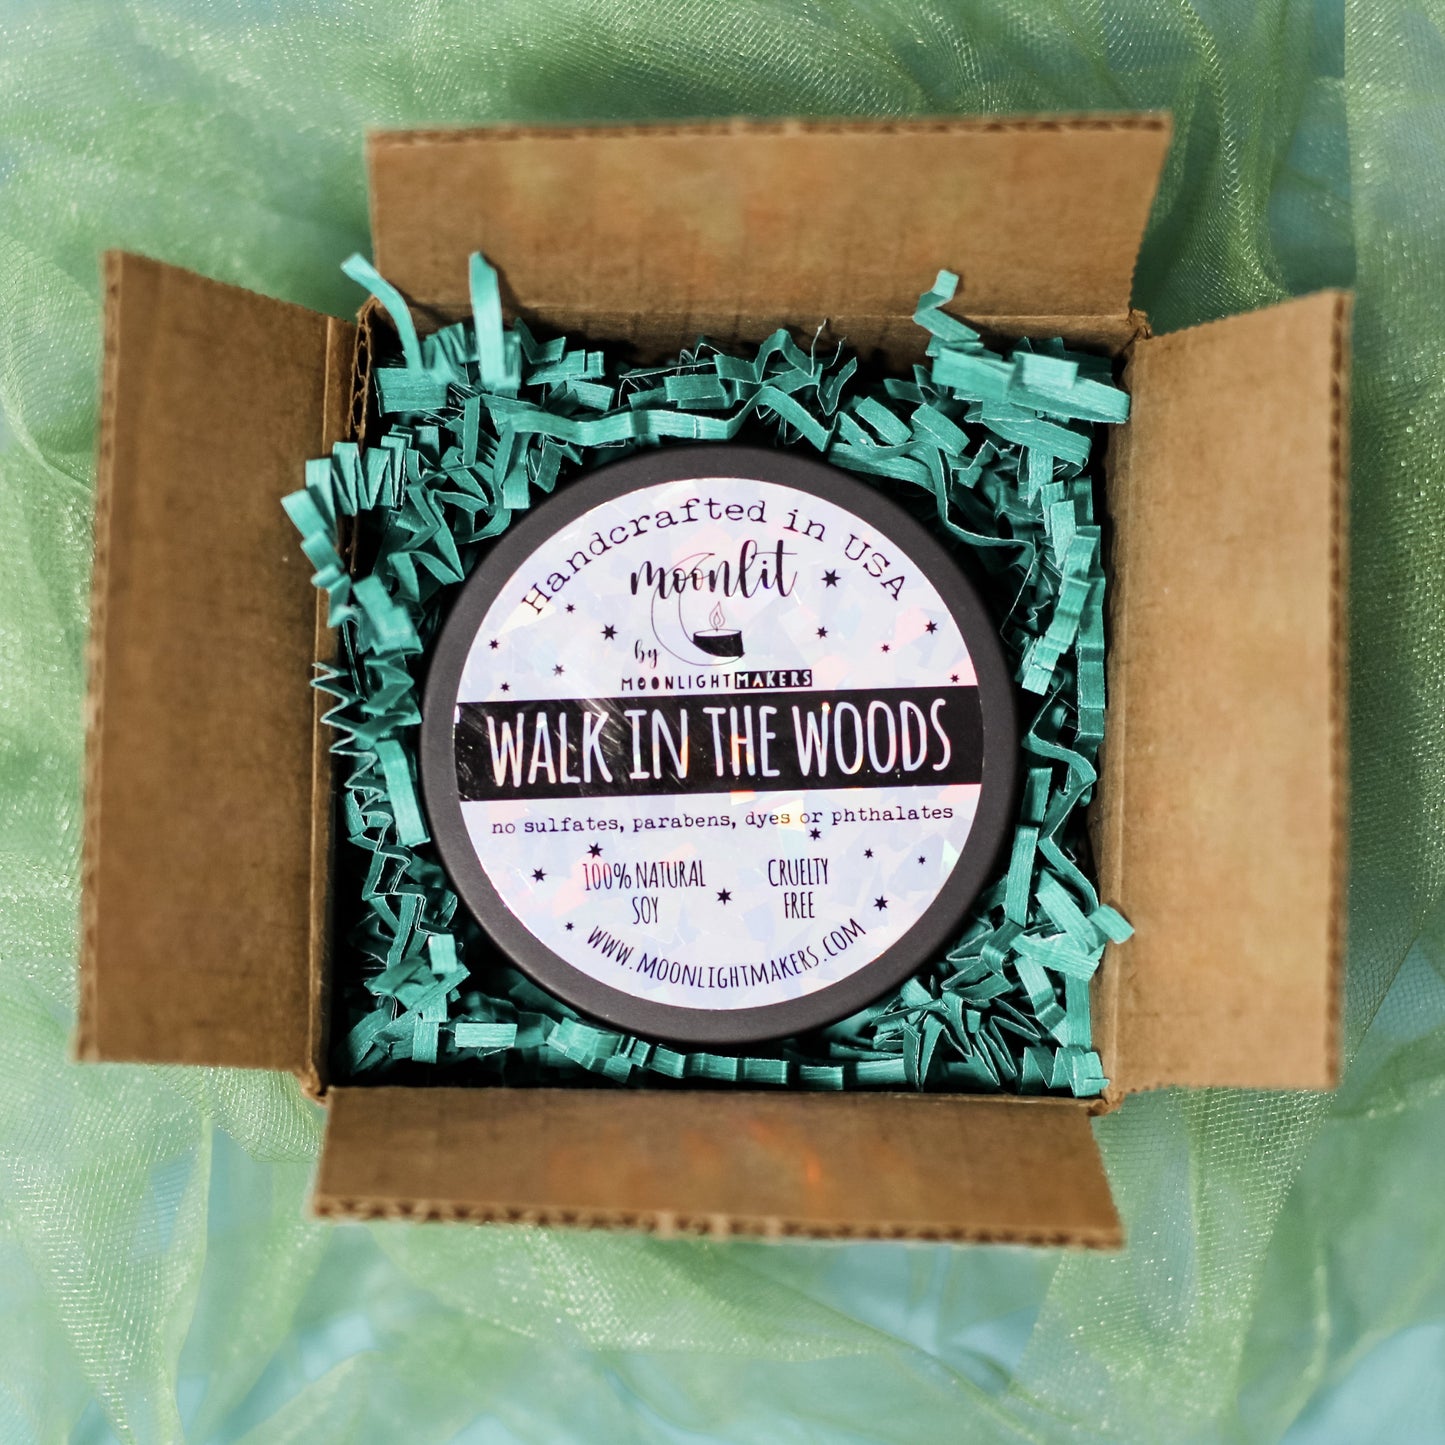 It's Just A Phase (Moon) - 8oz Candle - Choose Your Scent - 100% Natural Soy Wax